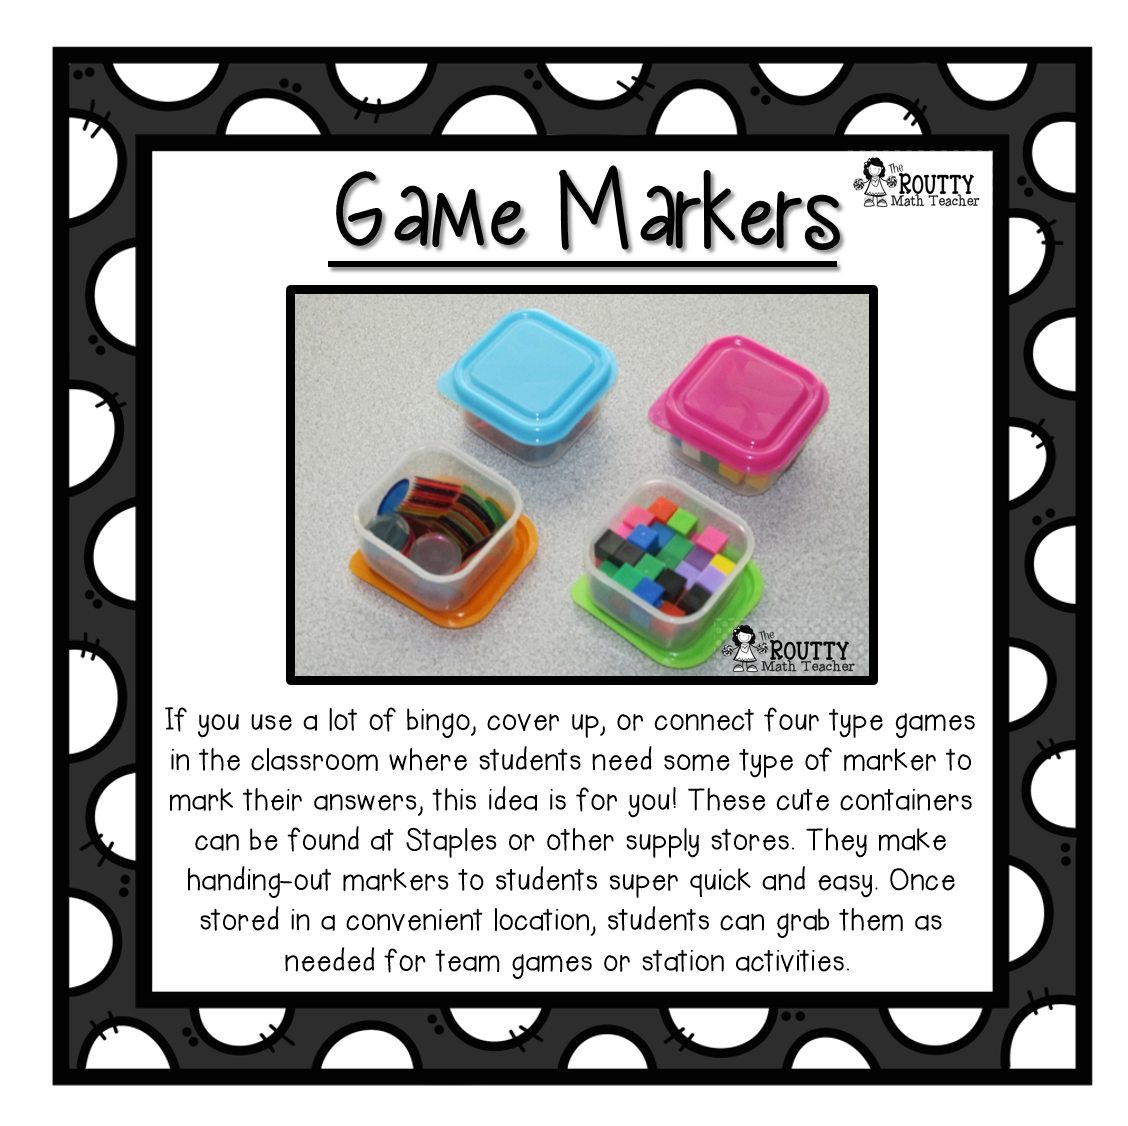 Game Markers